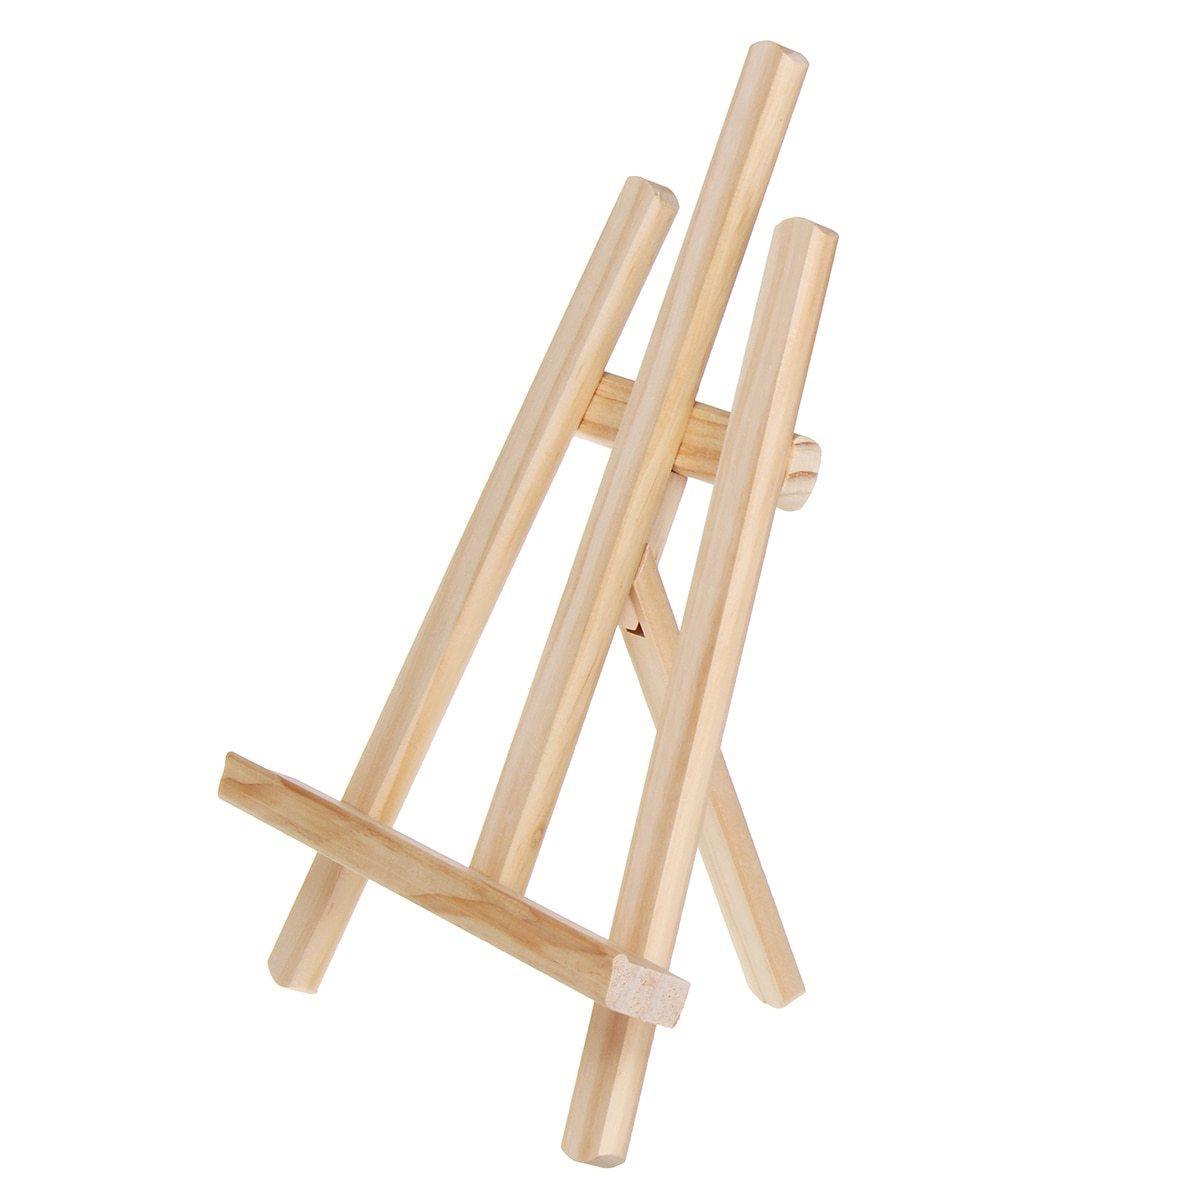 Crafty by Numbers Wooden Easel: Turn Art into a Comfortable